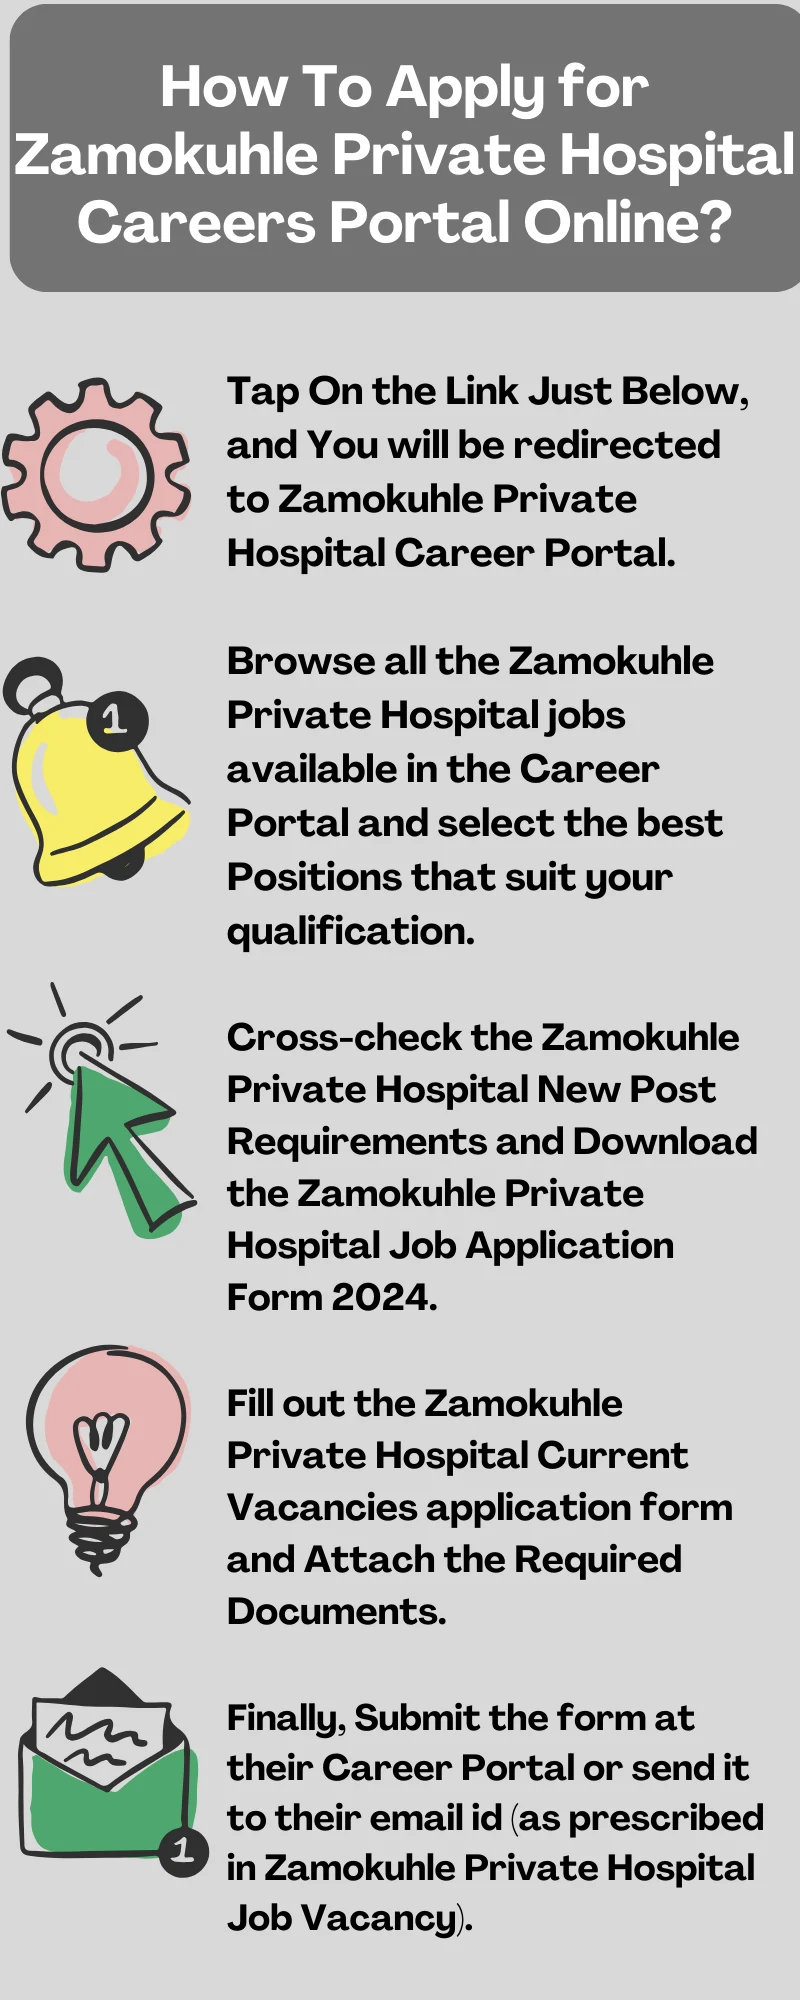 How To Apply for Zamokuhle Private Hospital Careers Portal Online?